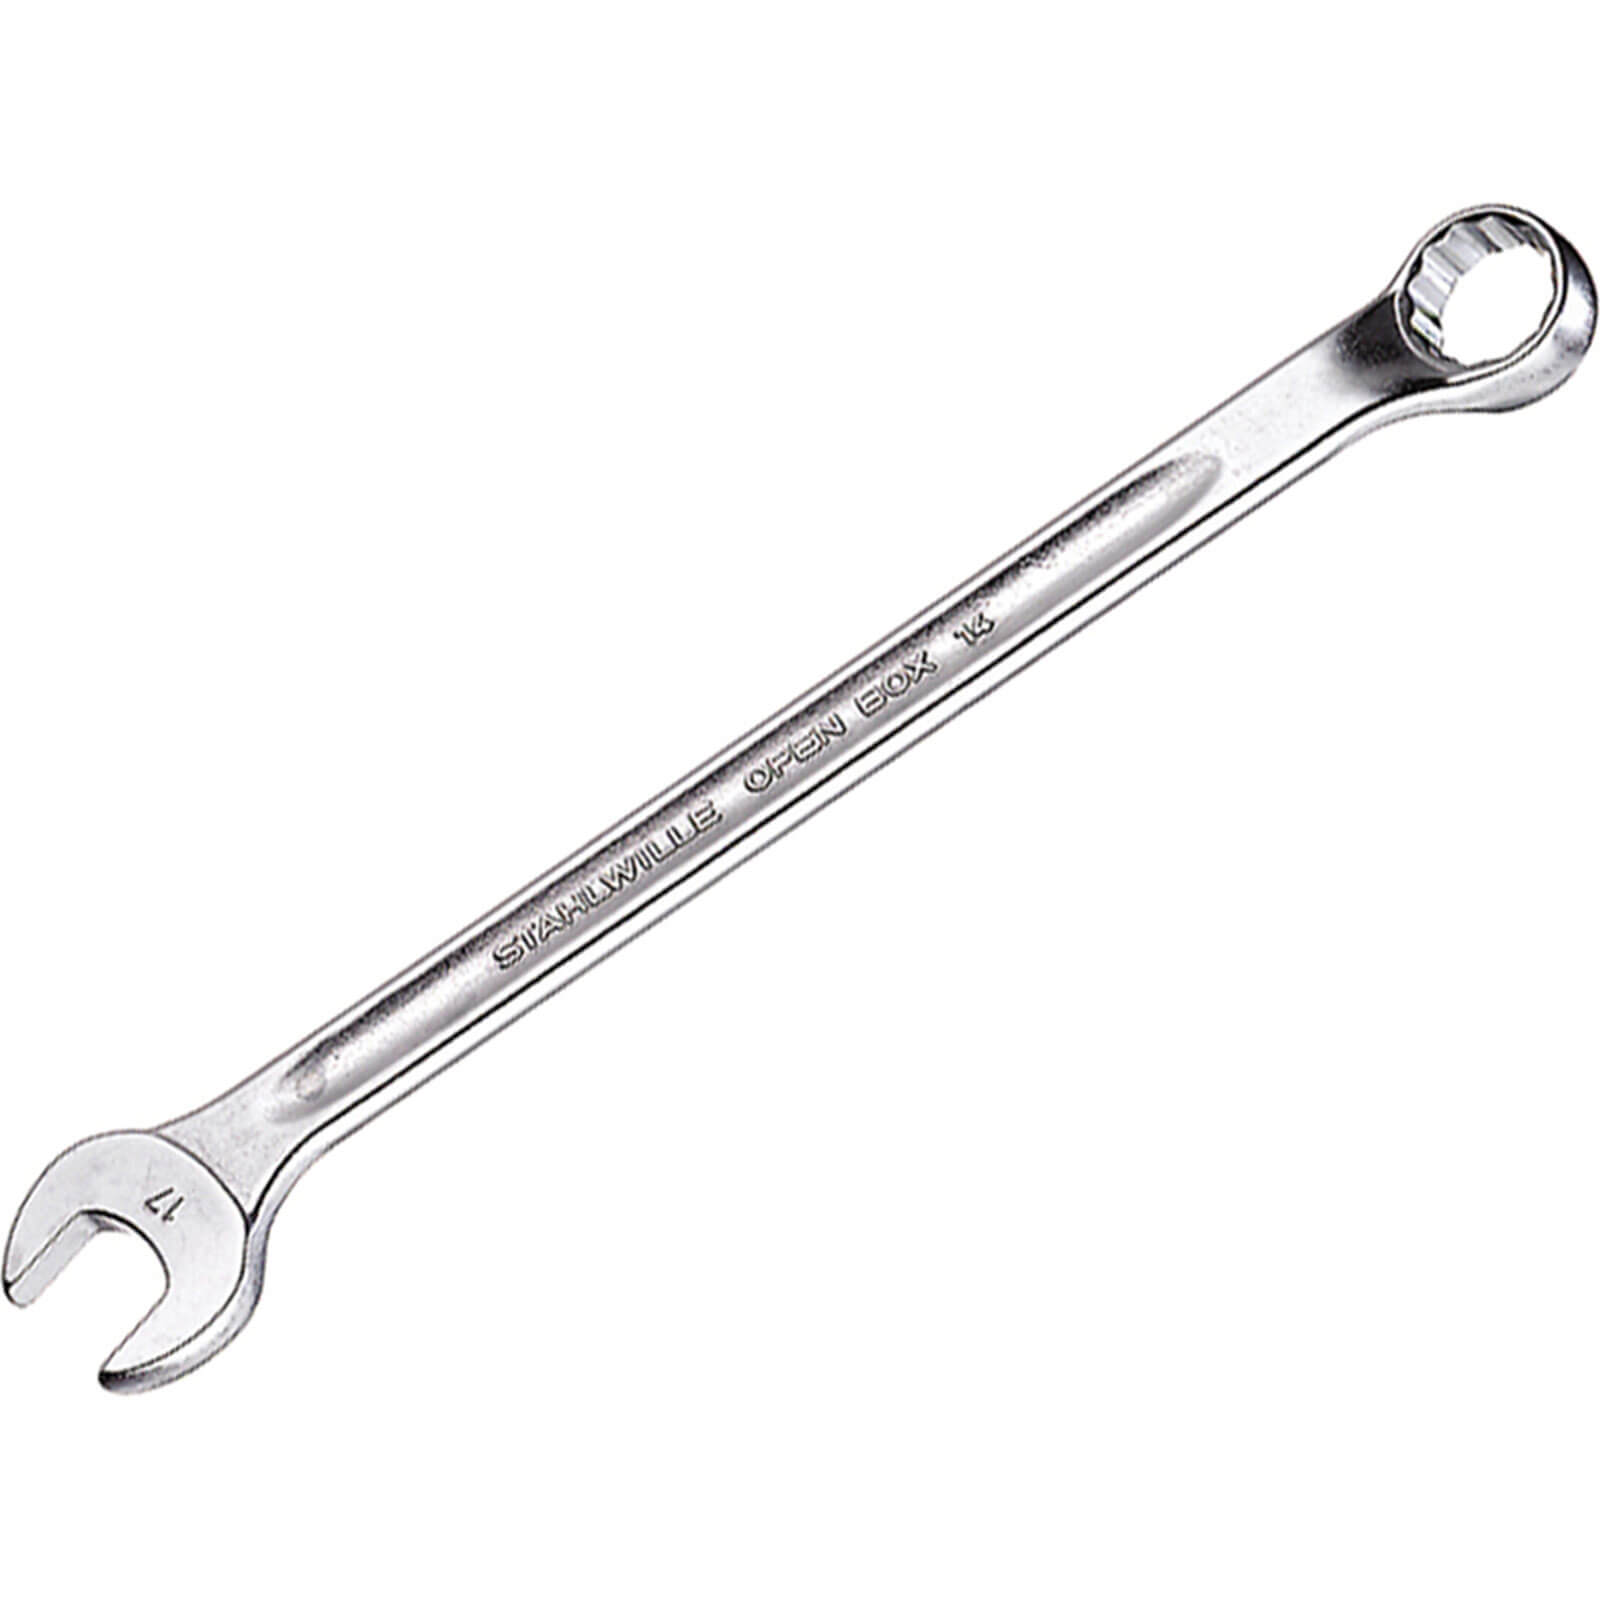 Image of Stahlwille Long Series Combination Spanner 18mm